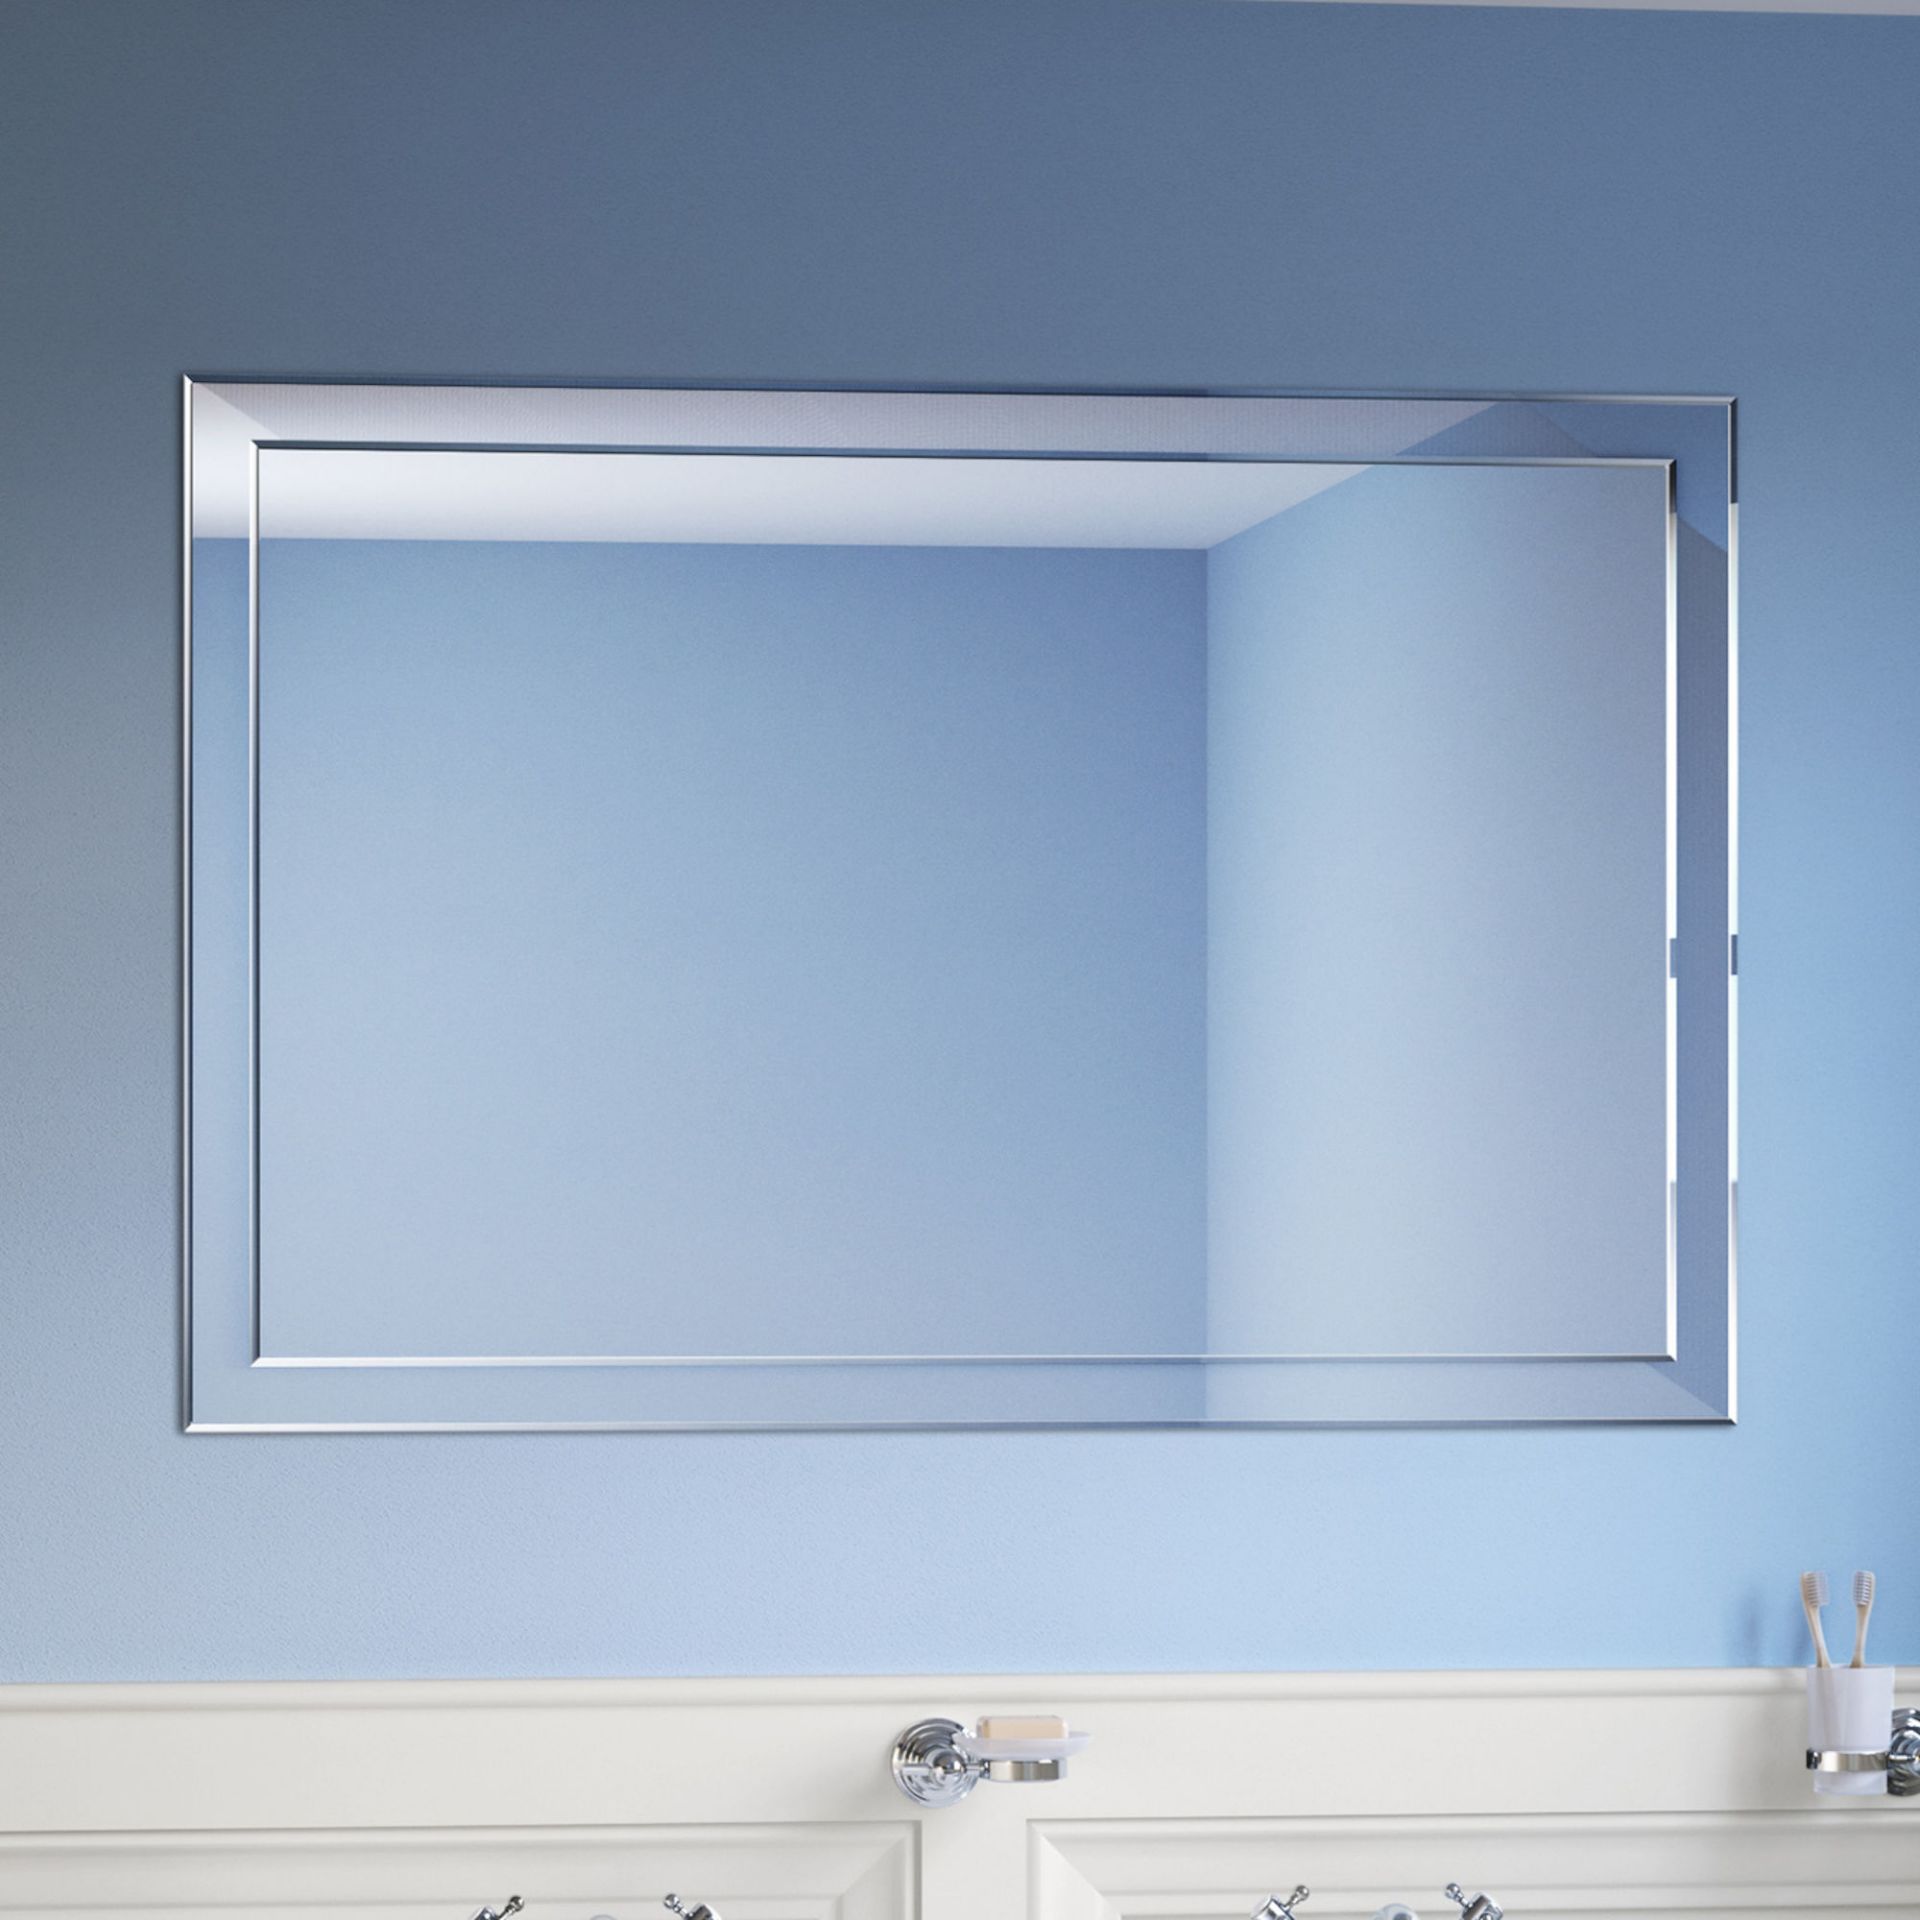 (LP79) 800x1200mm Bevel Mirror. Smooth beveled edge for additional safety and style Supplied fully